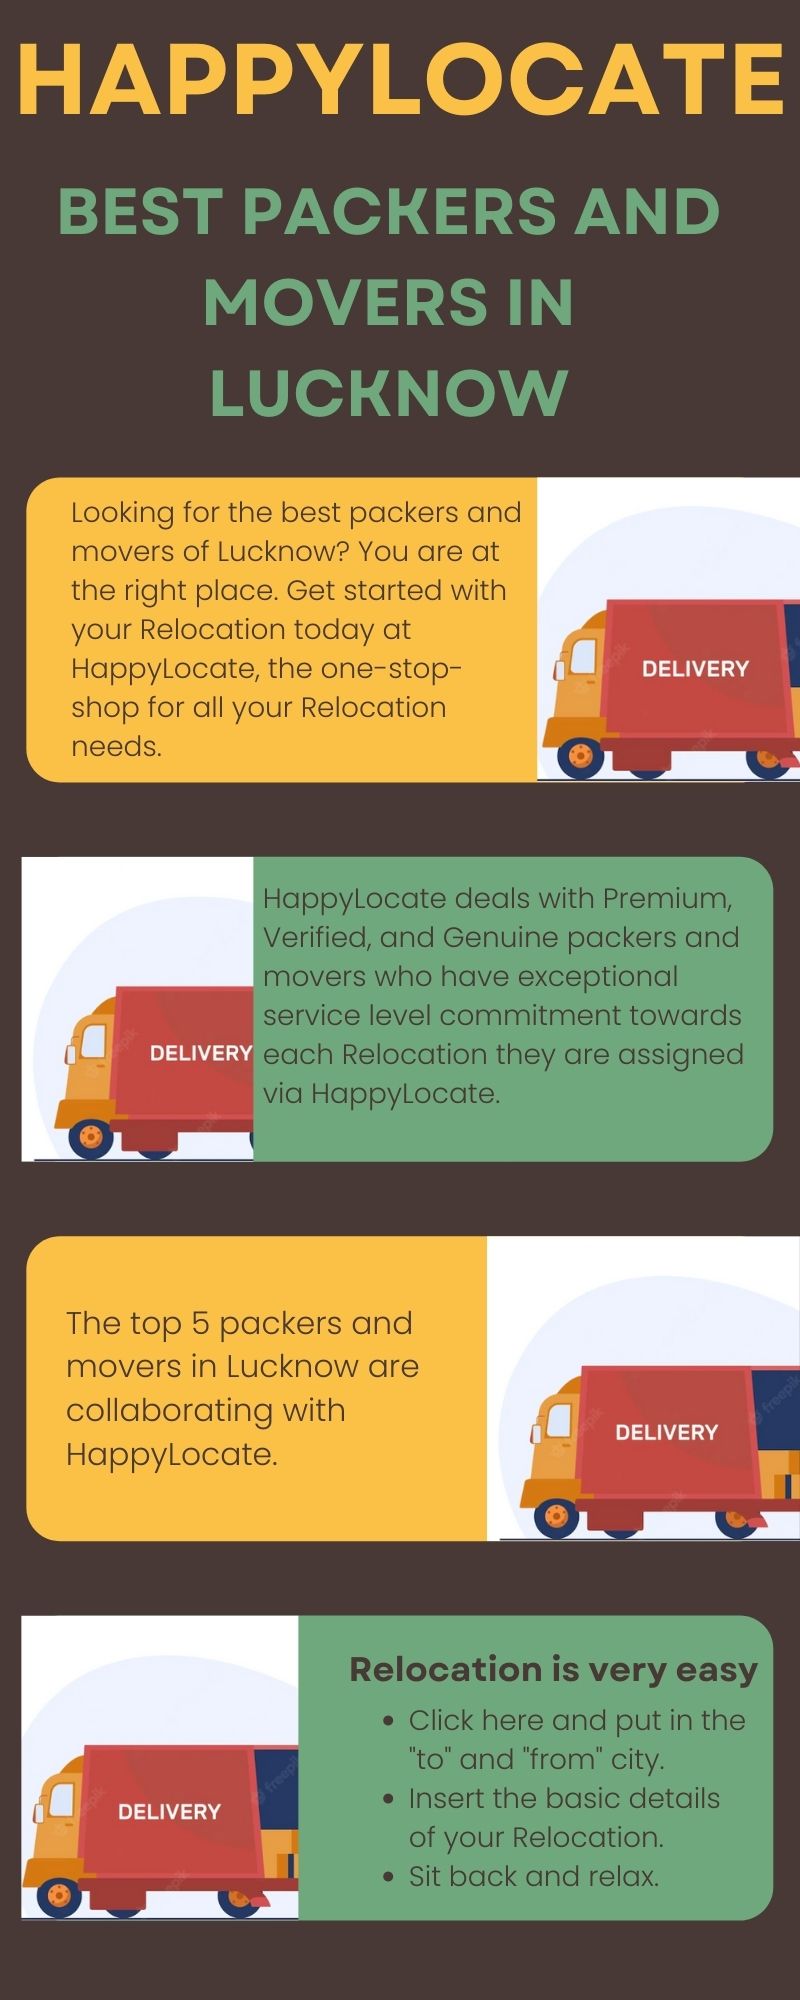 HAPPYLOCATE

BEST PACKERS AND
MOVERS IN
LUCKNOW

Looking for the best packers and

movers of Lucknow? You are at

the right place. Get started with

your Relocation today at

Happylocate, the one-stop DELIVERY
shop for all your Relocation

needs.

Happylocate deals with Premium,
Verified, and Genuine packers and
movers who have exceptional
service level commitment towards
each Relocation they are assigned
via Happylocate.

The top 5 packers and
movers in Lucknow are
collaborating with
Happylocate.

Relocation is very easy

Click here and put in the
to” and “from” city.

¢ Insert the basic details
of your Relocation.

¢ Sit back and relax.

DELIVERY